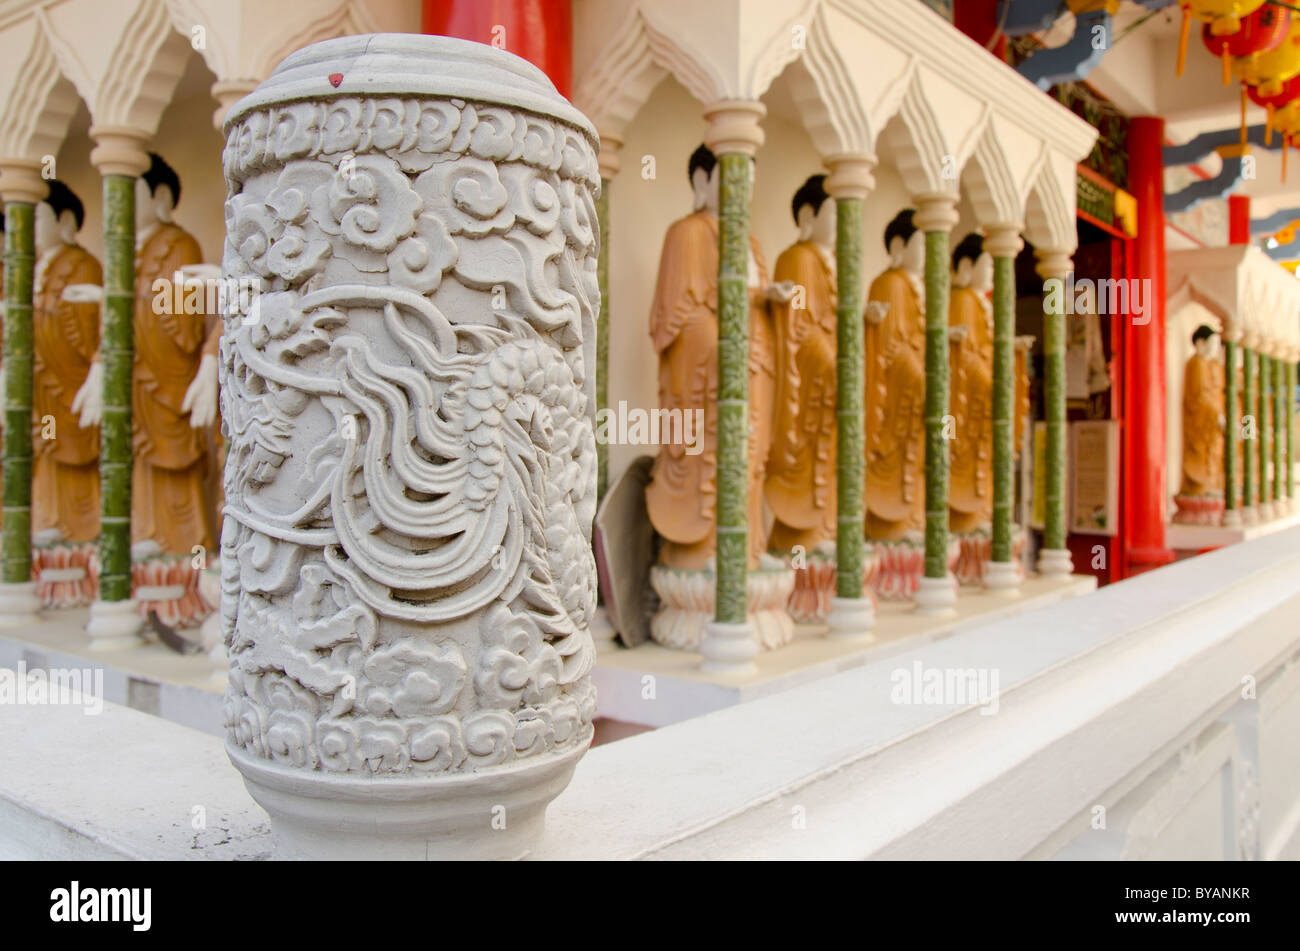 Malaysia, Island of Penang. Kek Lok Si Temple, largest temple in Southeast Asia. Ornate carved column. Stock Photo